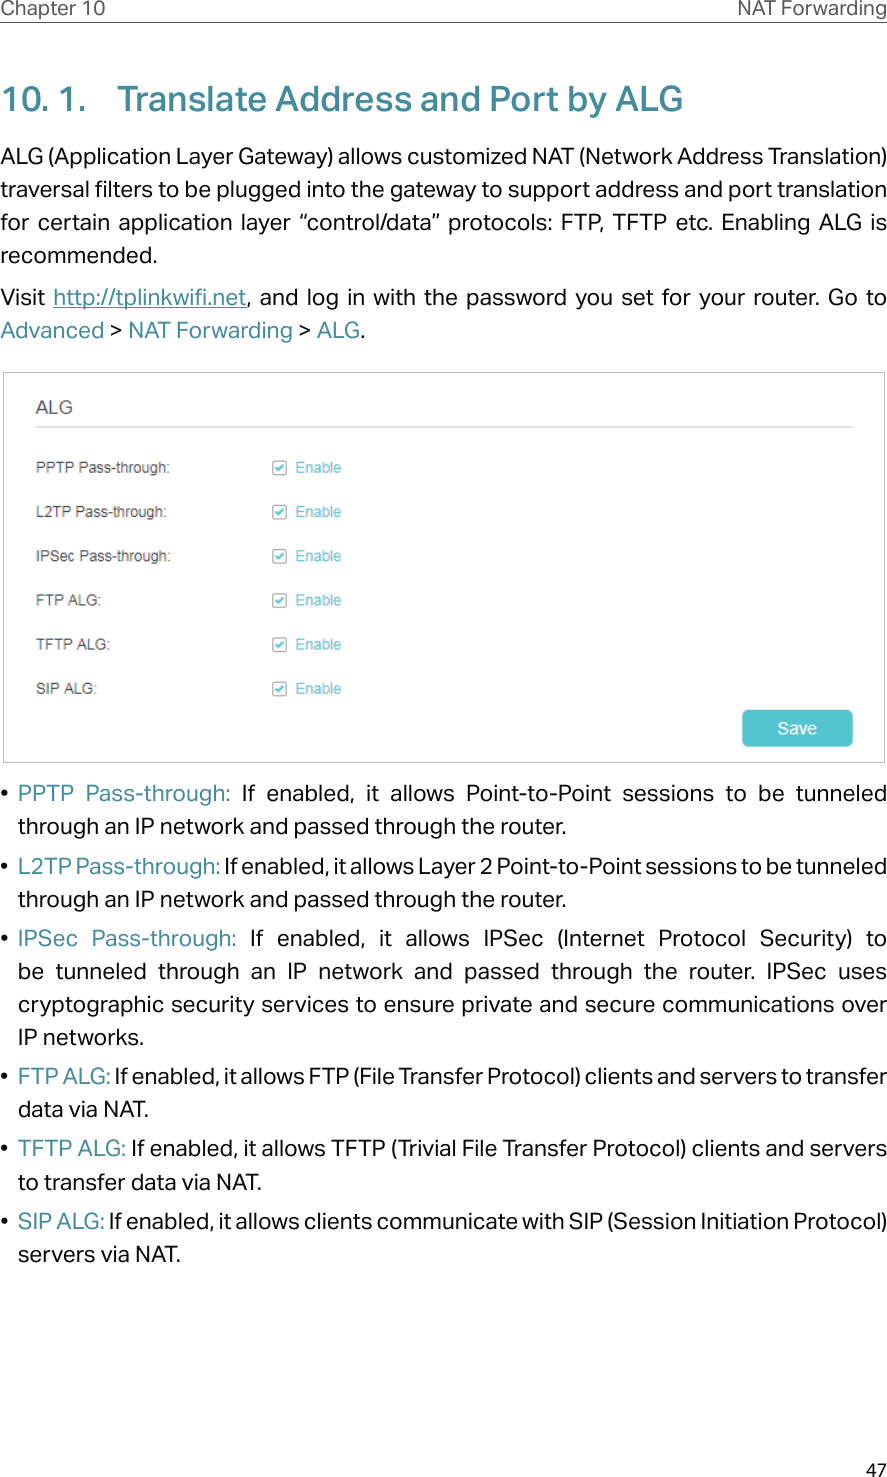 47Chapter 10 NAT Forwarding10. 1.  Translate Address and Port by ALGALG (Application Layer Gateway) allows customized NAT (Network Address Translation) traversal filters to be plugged into the gateway to support address and port translation for certain application layer “control/data” protocols: FTP, TFTP etc. Enabling ALG is recommended.Visit  http://tplinkwifi.net, and log in with the password you set for your router. Go to Advanced &gt; NAT Forwarding &gt; ALG.•  PPTP Pass-through: If enabled, it allows Point-to-Point sessions to be tunneled through an IP network and passed through the router.•  L2TP Pass-through: If enabled, it allows Layer 2 Point-to-Point sessions to be tunneled through an IP network and passed through the router.•  IPSec Pass-through: If enabled, it allows IPSec (Internet Protocol Security) to be tunneled through an IP network and passed through the router. IPSec uses cryptographic security services to ensure private and secure communications over IP networks.•  FTP ALG: If enabled, it allows FTP (File Transfer Protocol) clients and servers to transfer data via NAT.•  TFTP ALG: If enabled, it allows TFTP (Trivial File Transfer Protocol) clients and servers to transfer data via NAT.•  SIP ALG: If enabled, it allows clients communicate with SIP (Session Initiation Protocol) servers via NAT.